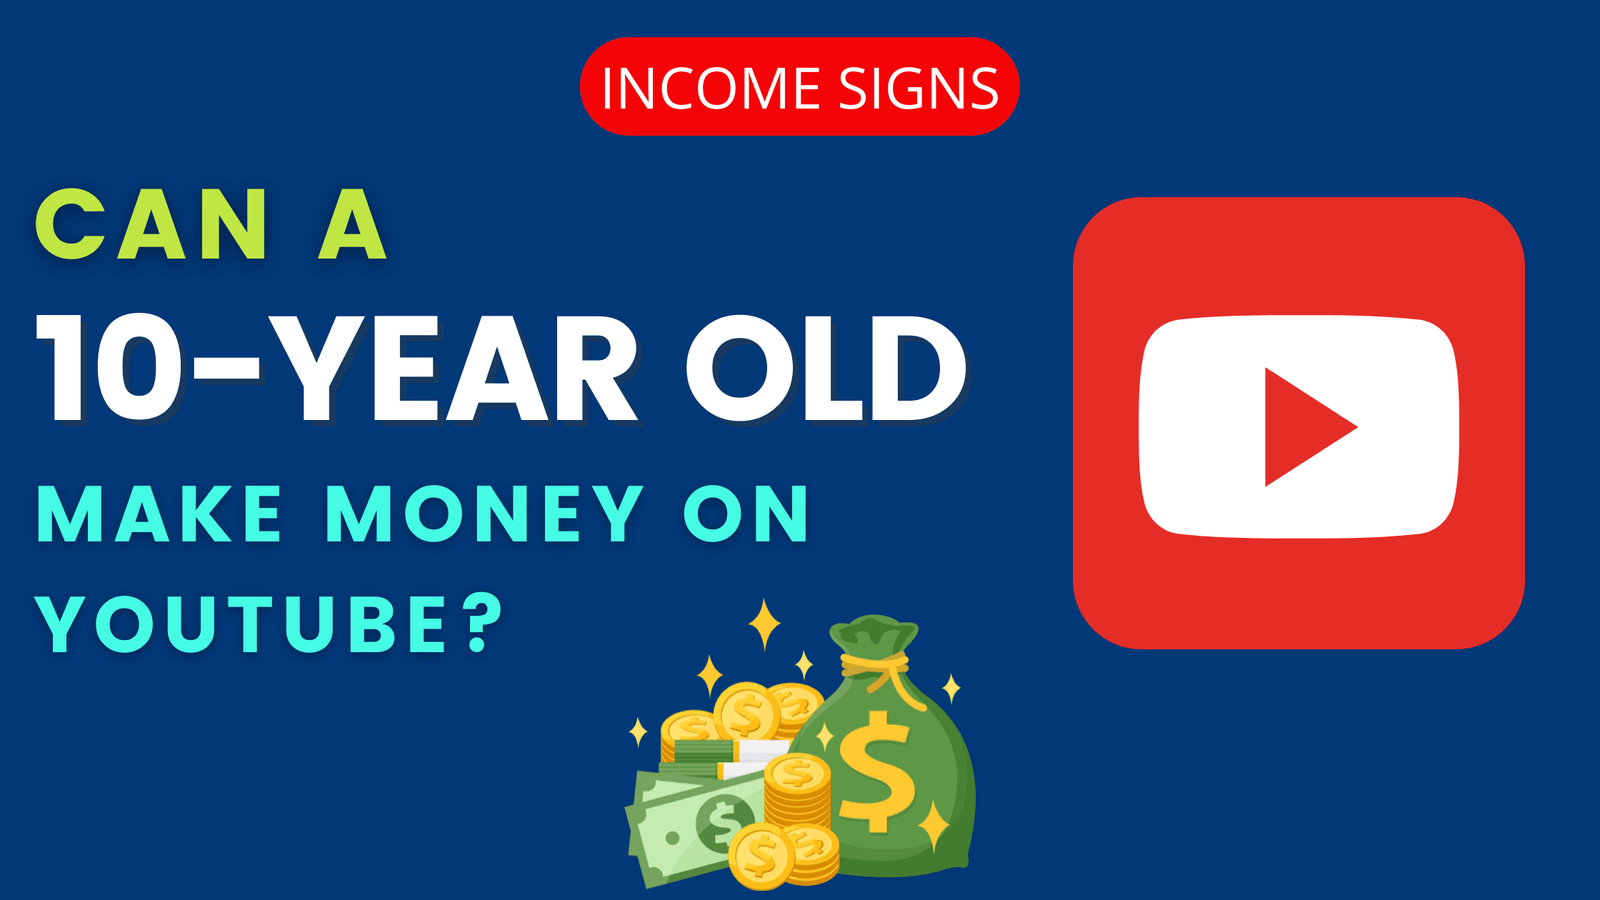 Can a 10-year old make money on YouTube - Income Signs